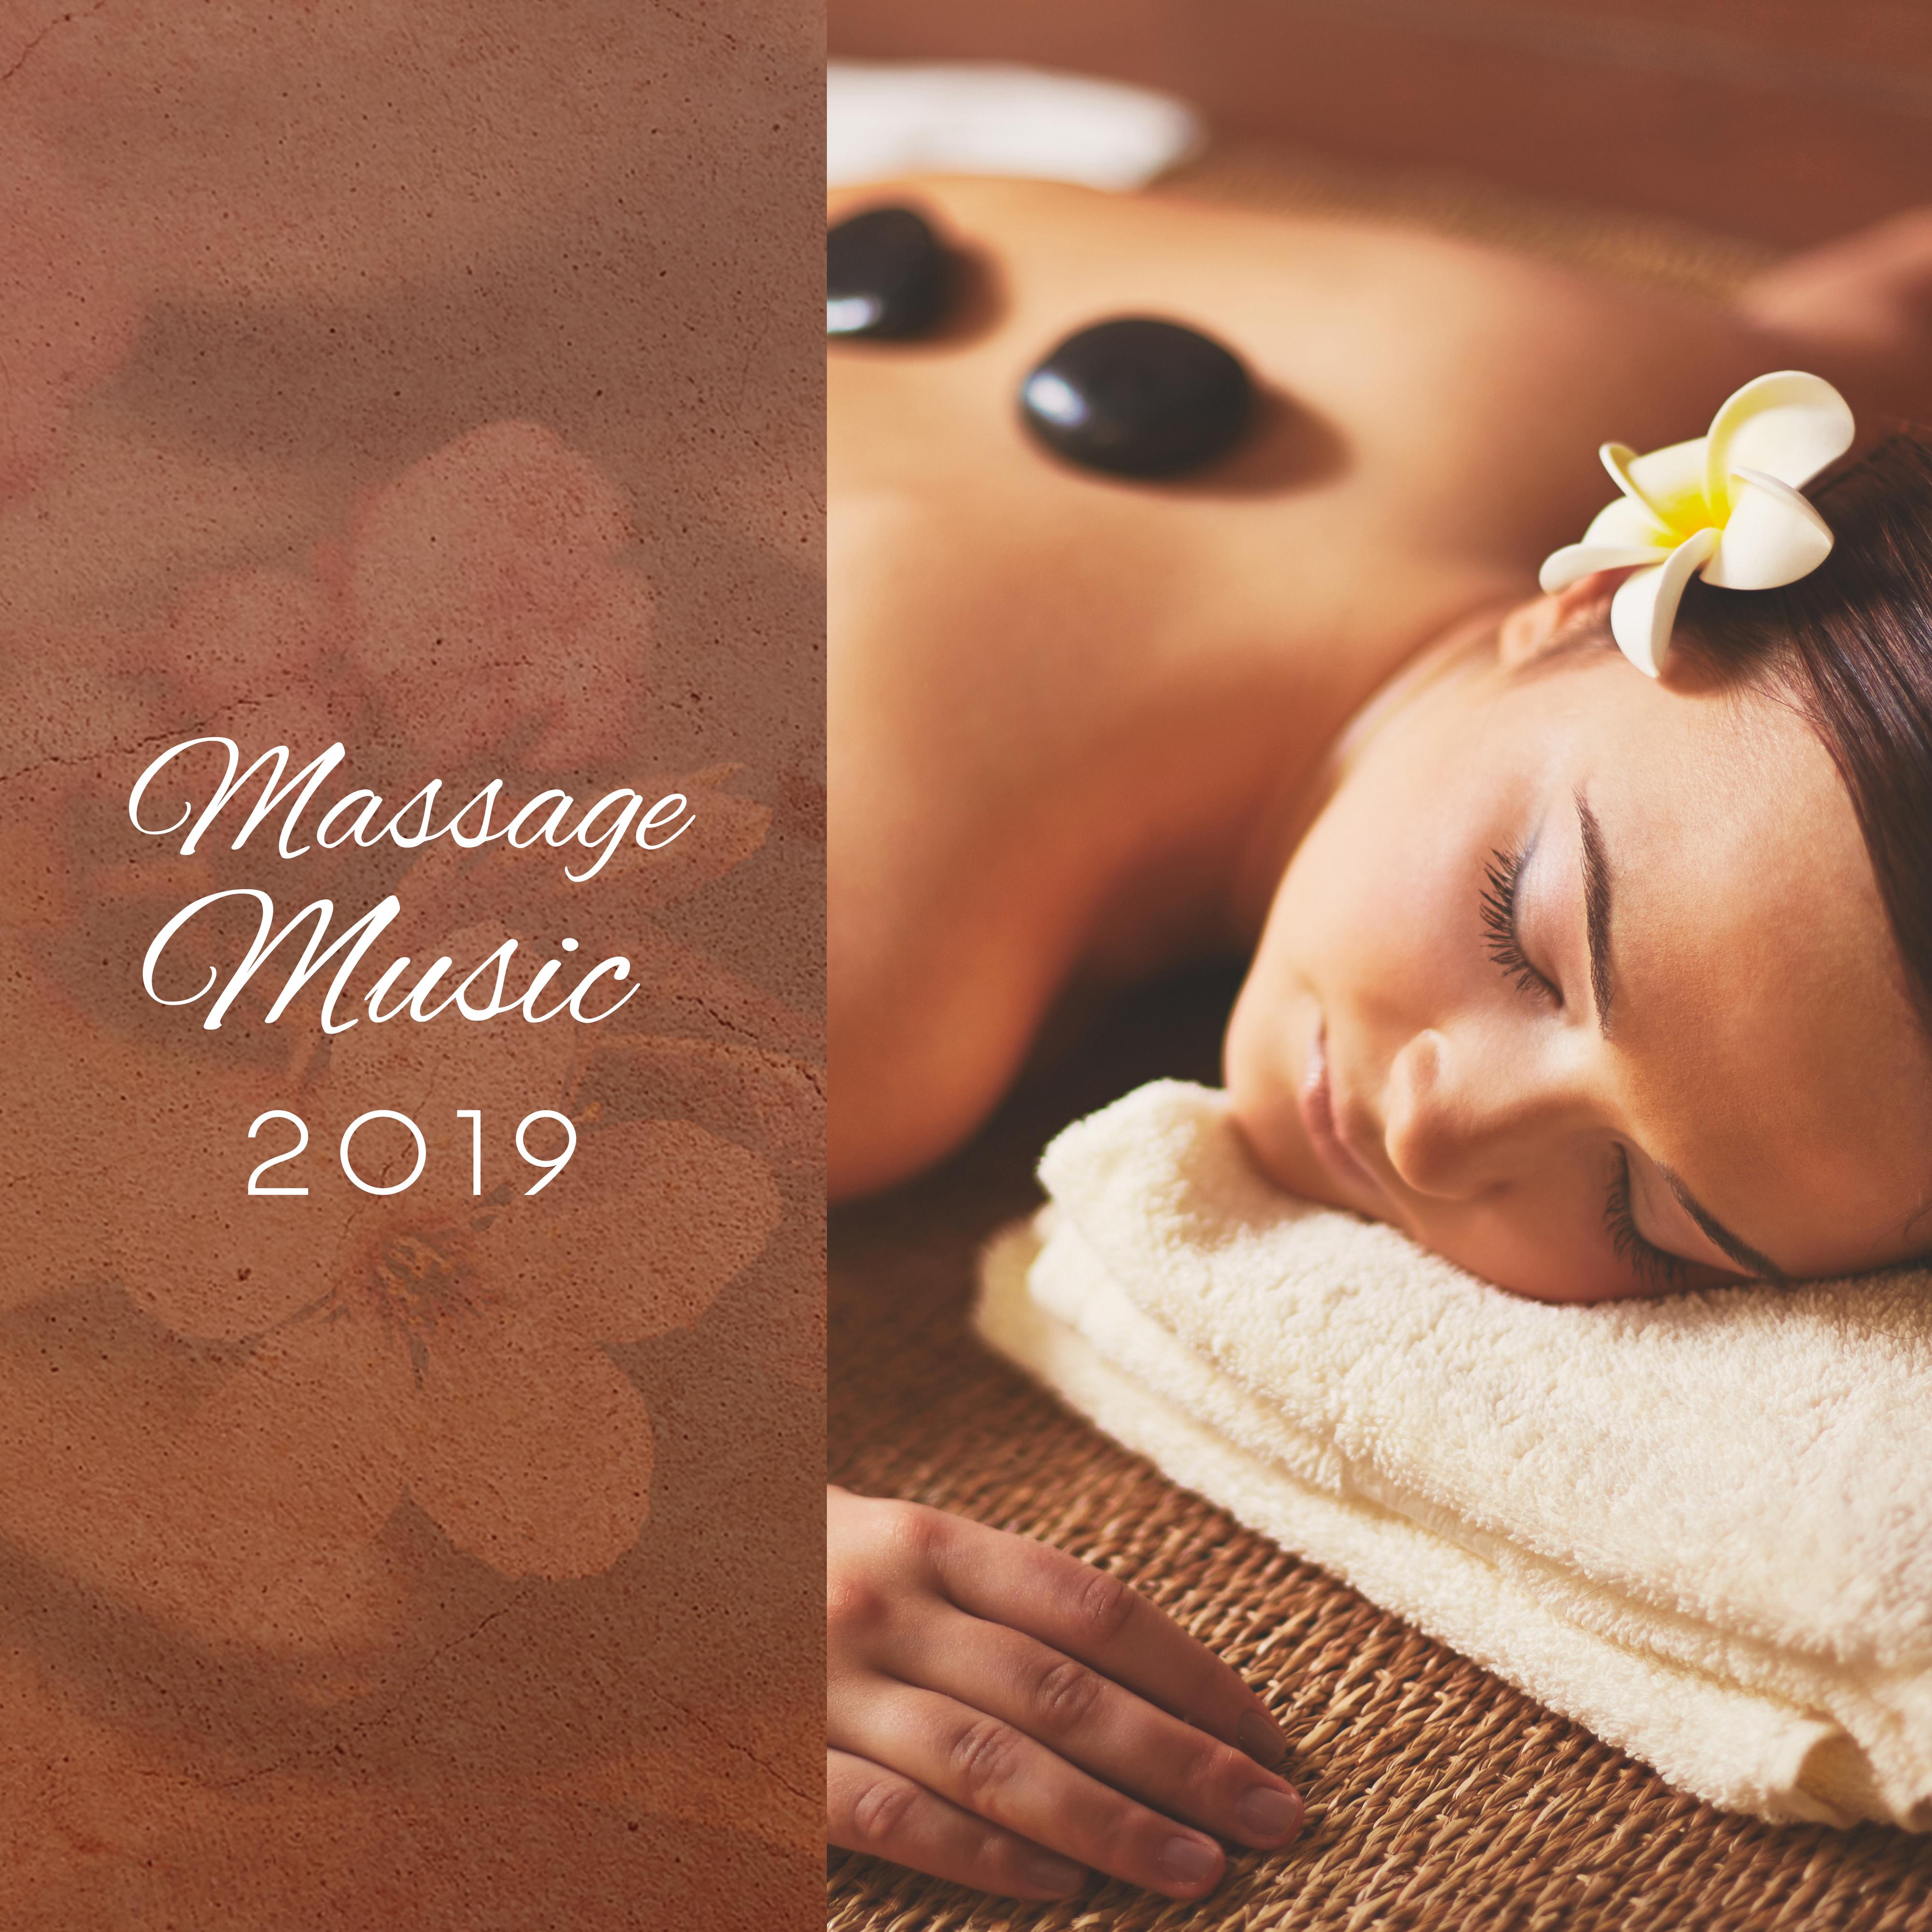 Massage Music 2019 – Relaxing Songs for Pure Relaxation, Sleep, Spa Chillout Music, Zen Lounge, Healing Melodies to Rest, Spa Therapy